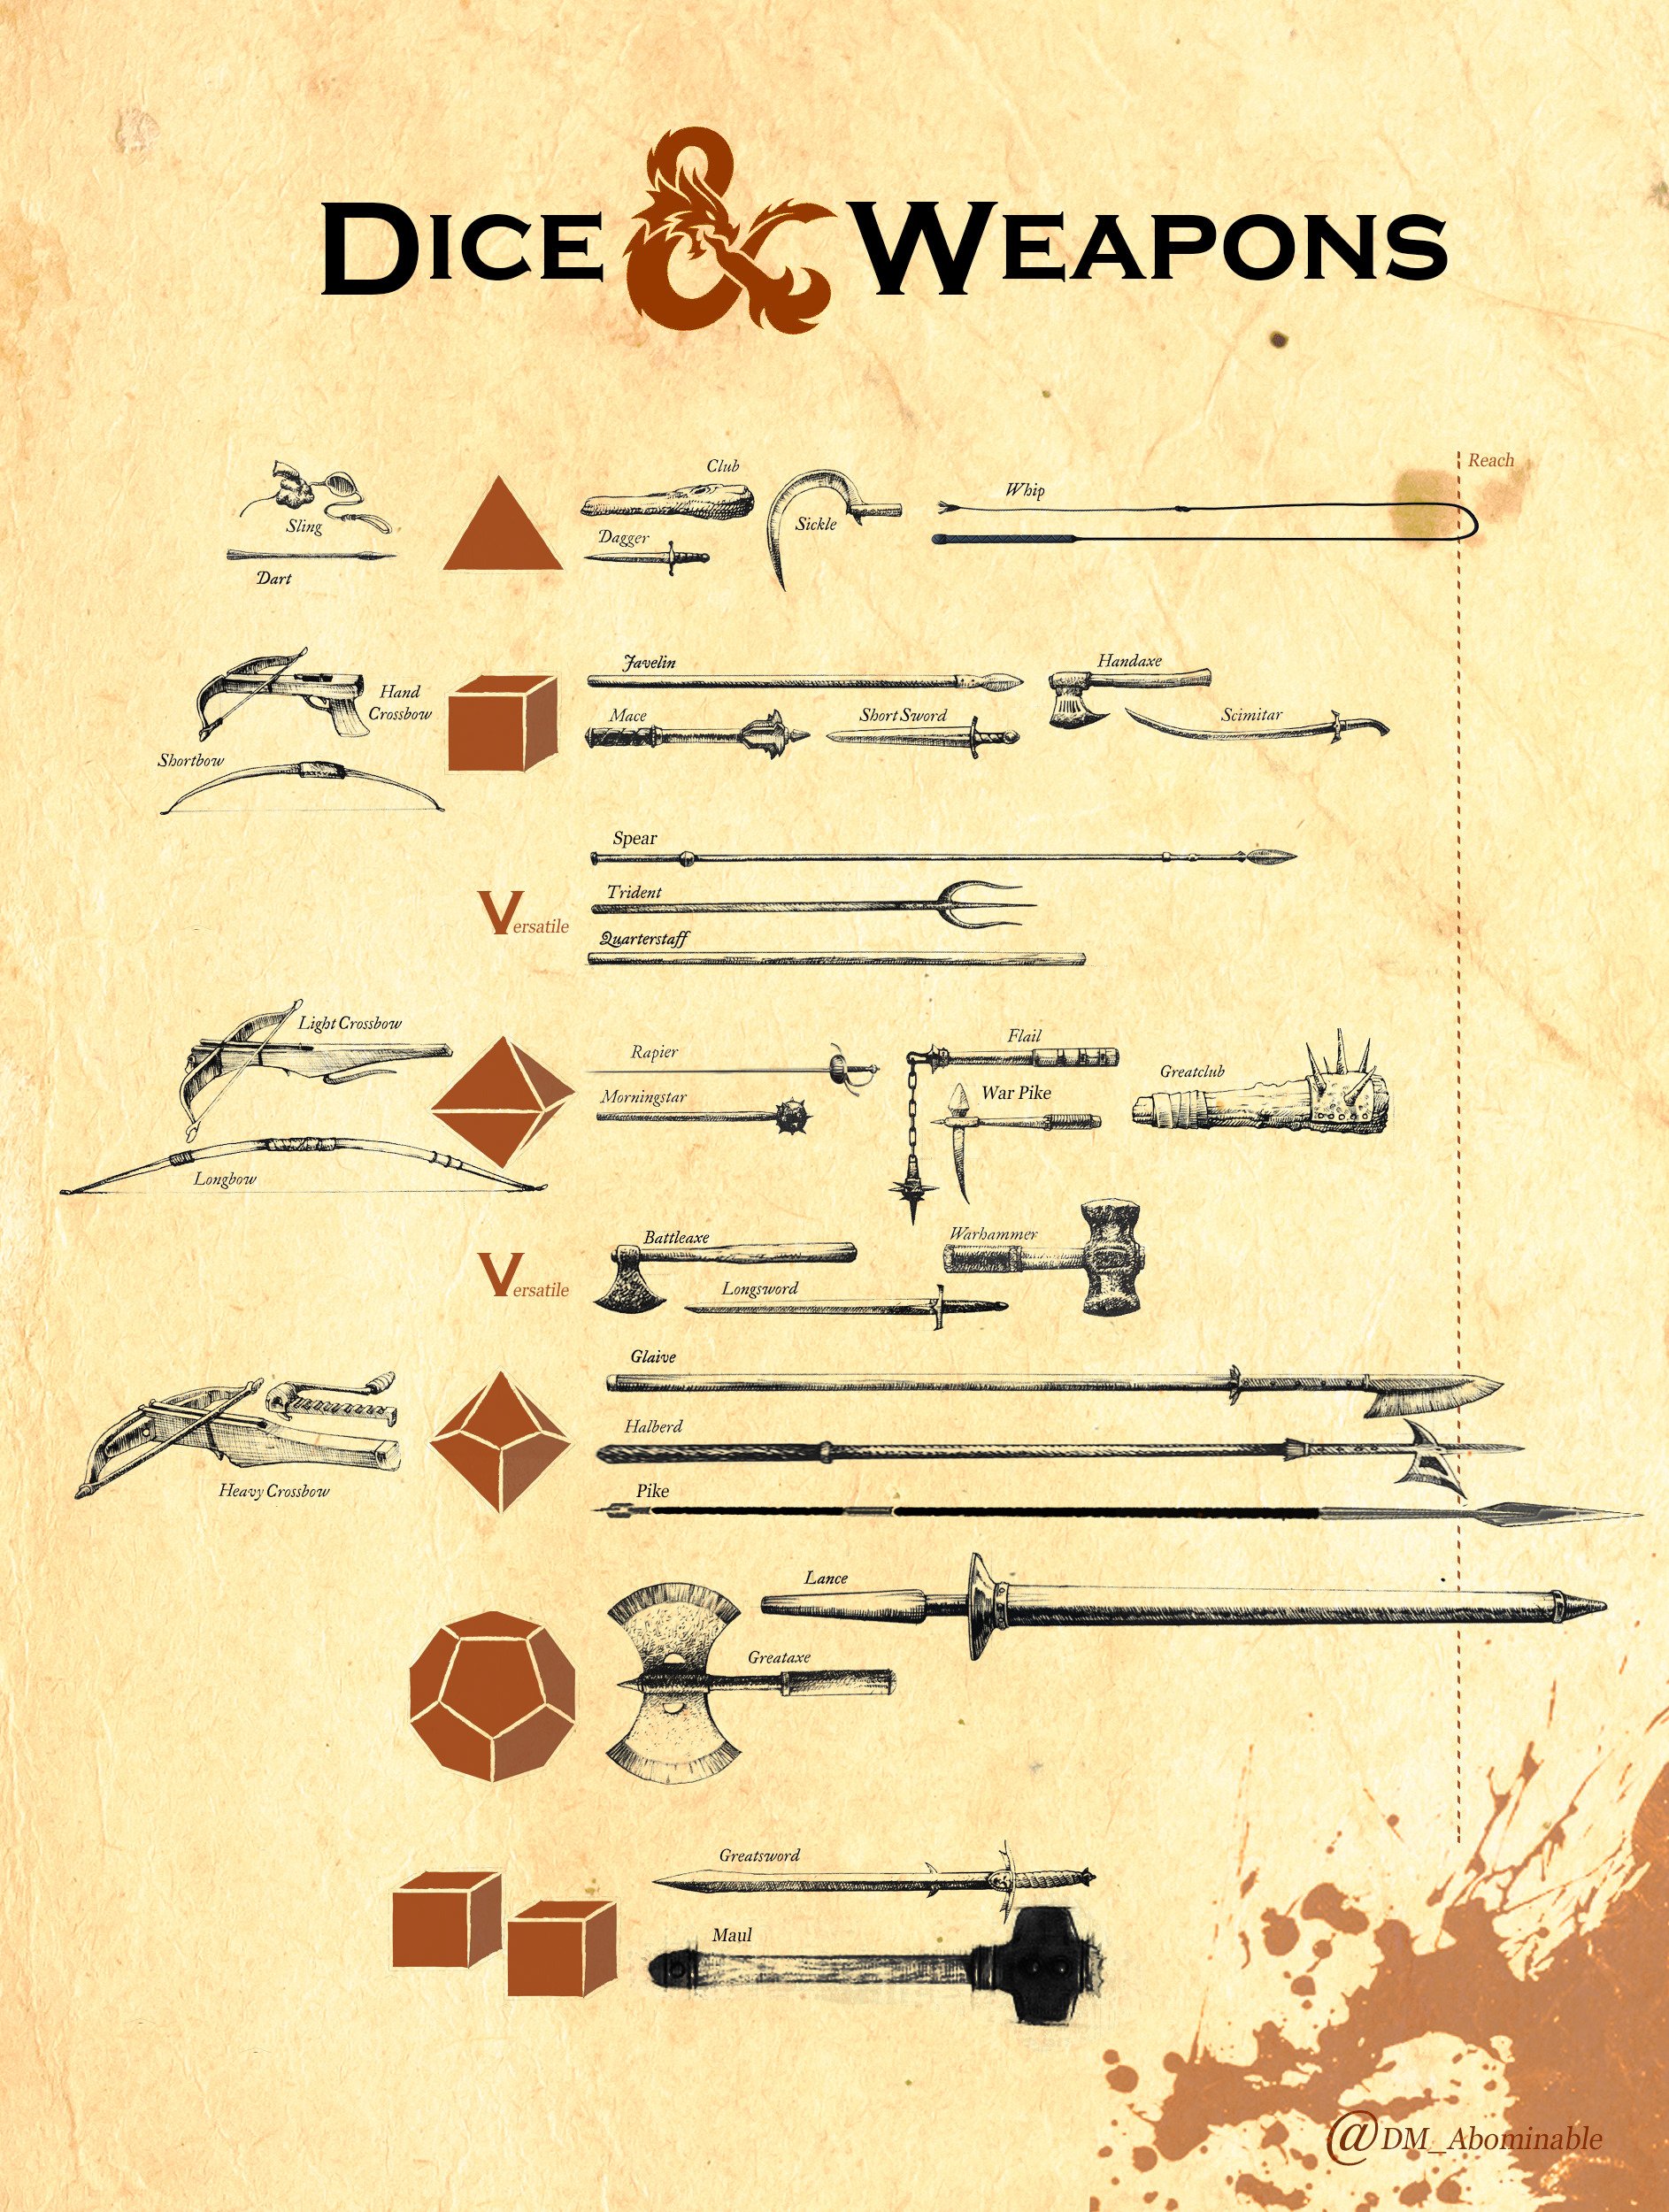 Twitter 上的Crocheteur："Dice&amp;Weapons! just this table to help DMs (and myself) the handling of weapons. Feel the power of your dice! # DnD #DnD5e #DMtip https://t.co/xwLhD4O6ZE" / Twitter